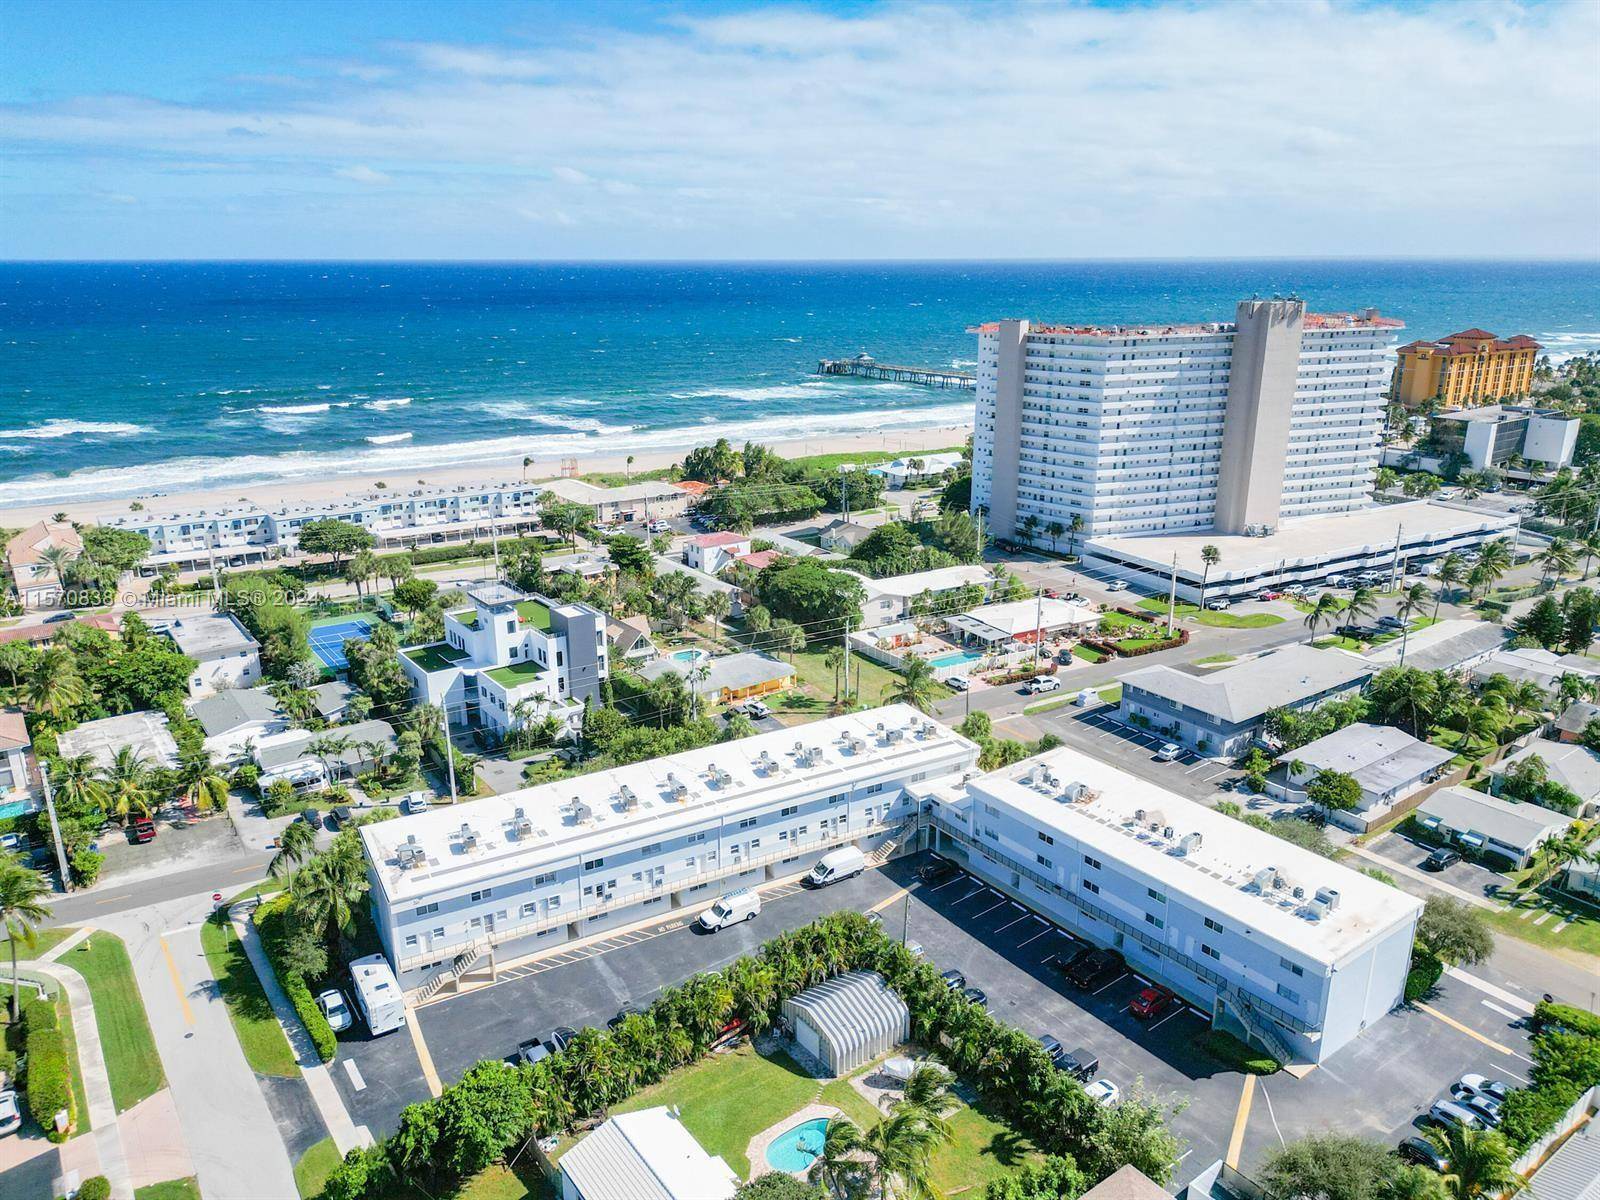 THIS CHARMING 1 BEDROOM 1 BATHROOM OFFERS A PRIME LOCATION JUST STEPS AWAY FROM BEACH, DINING AND ENTERTAIMENT, MODERN KITCHEN WITH STAINLESS STEEL APPLIANCES, SPACIOUS LIVING AREA, WASHER AND DRYER ...